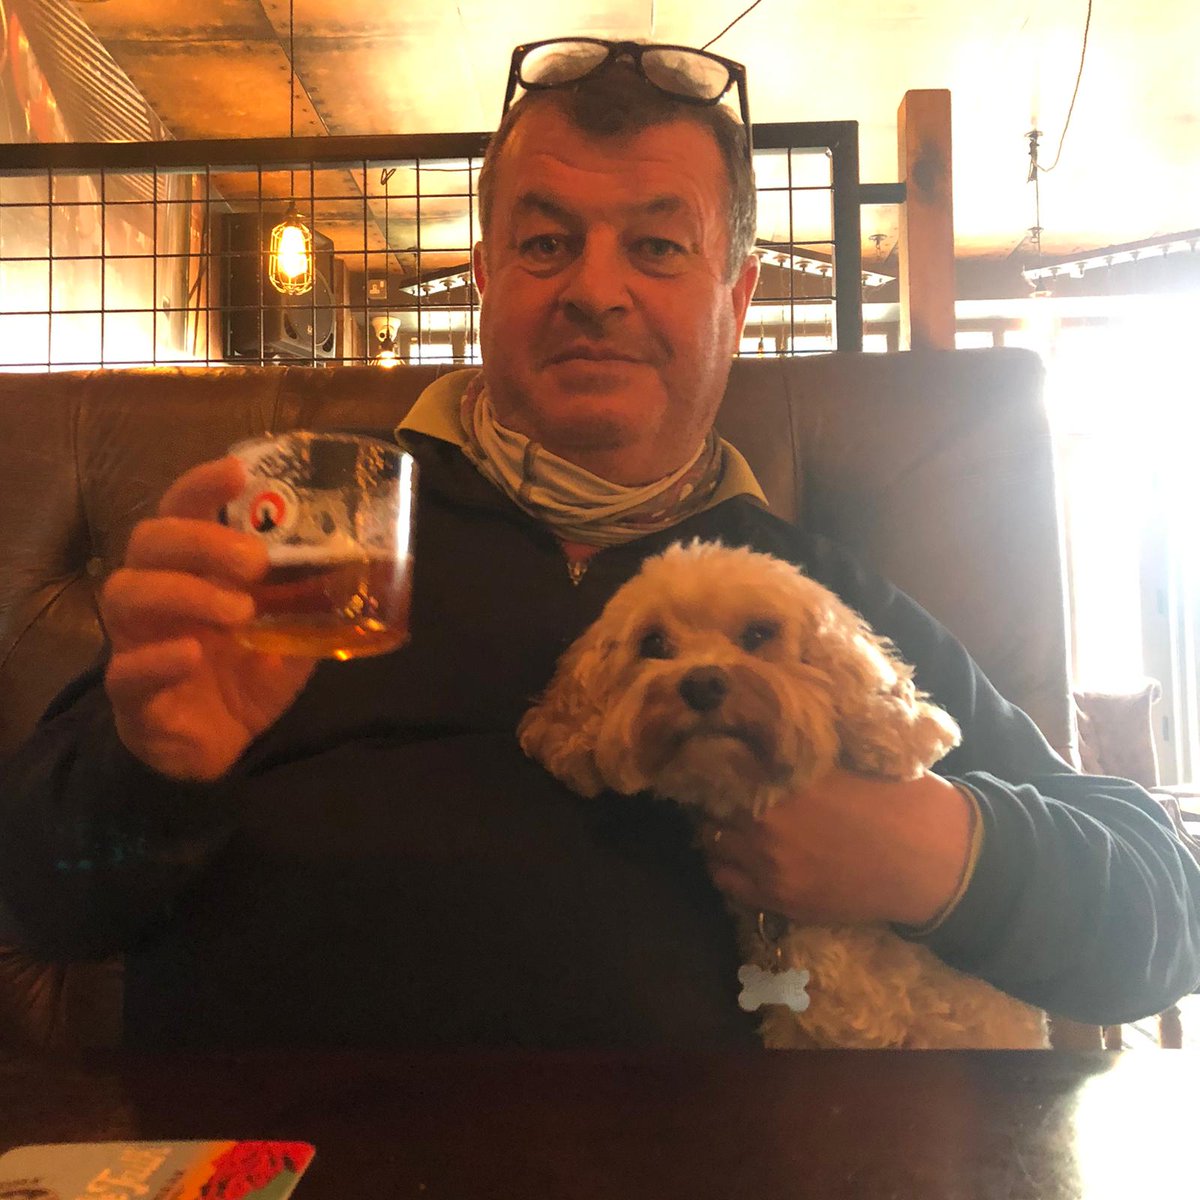 Bring in your dog and have a beer this Saturday.🐶

#camerons #pints #lionspride #beerlovers #paleale #ale #pumpit #didsbury #beavertown #tinyrebel #cloudwater #oldmout #peroni #erdinger #dogfriendly #saturday